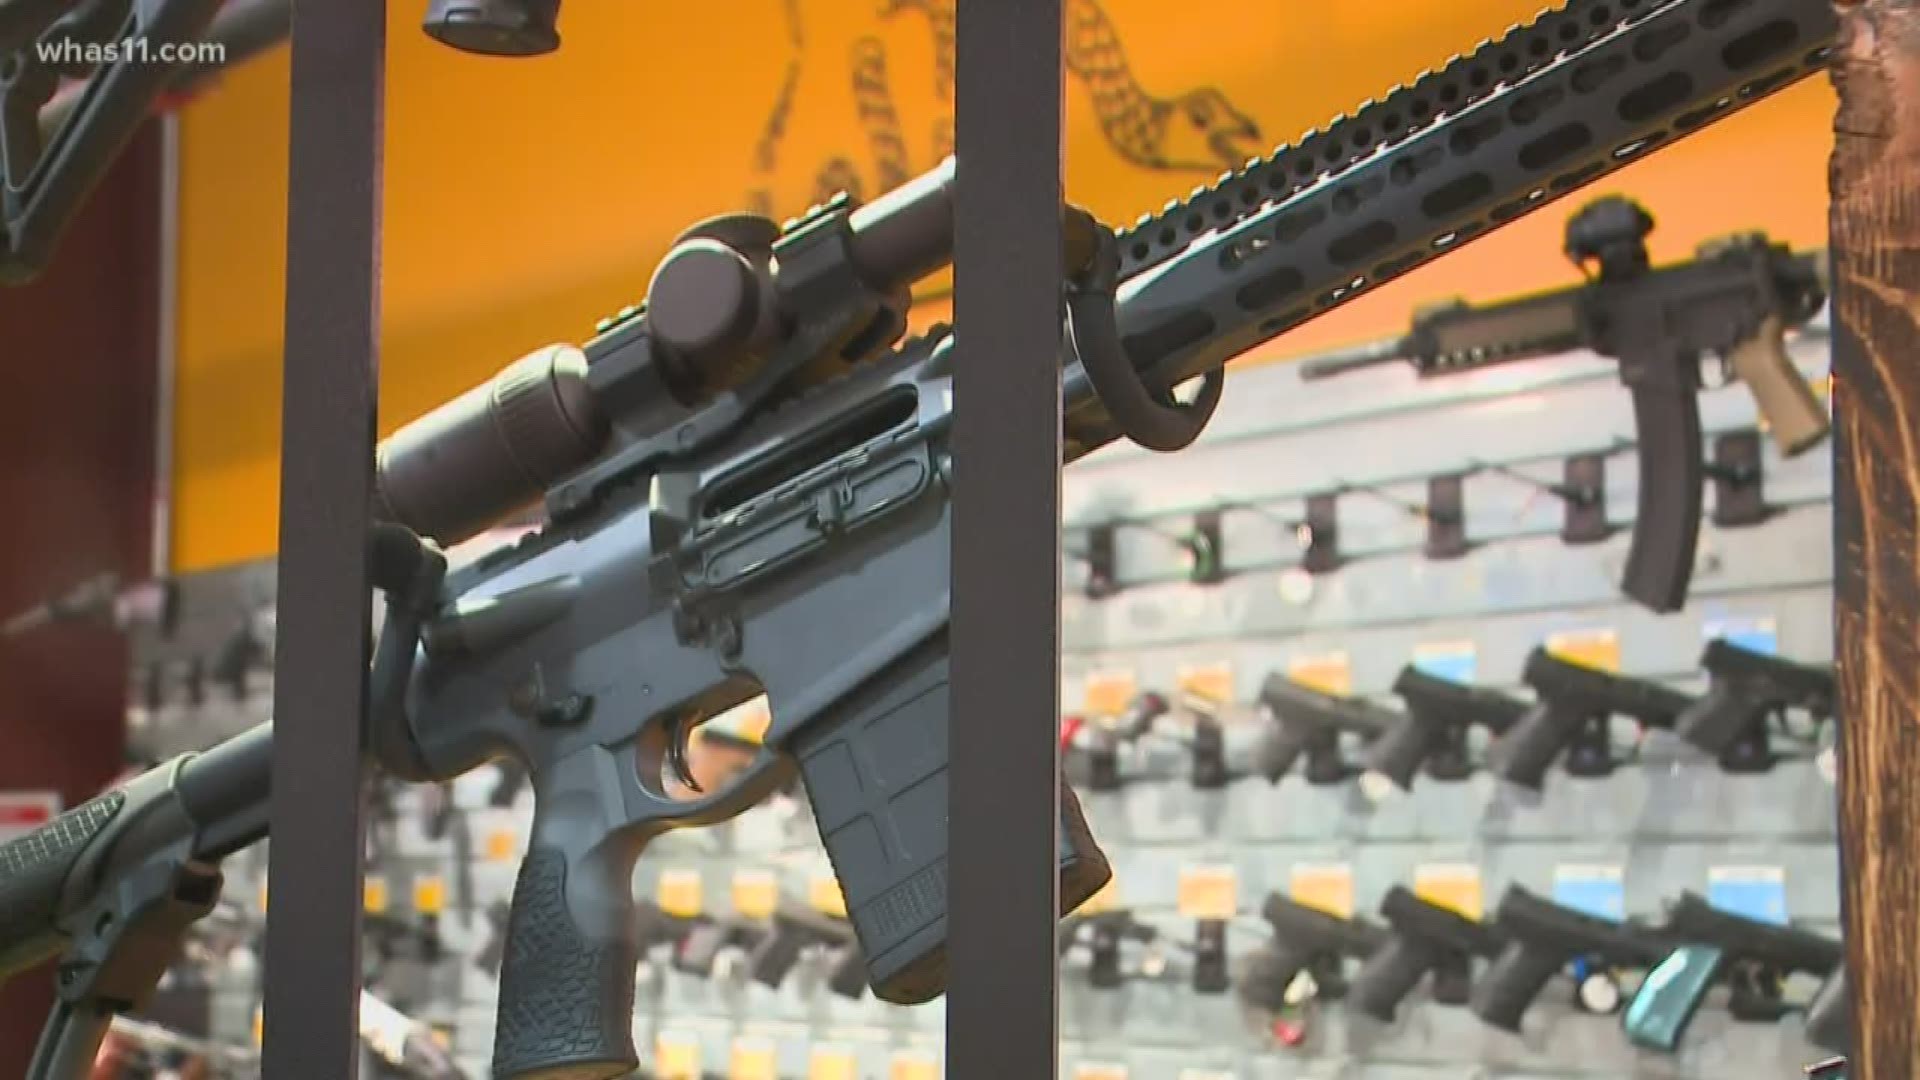 Oldham County is taking the first steps towards becoming a second amendment sanctuary county.